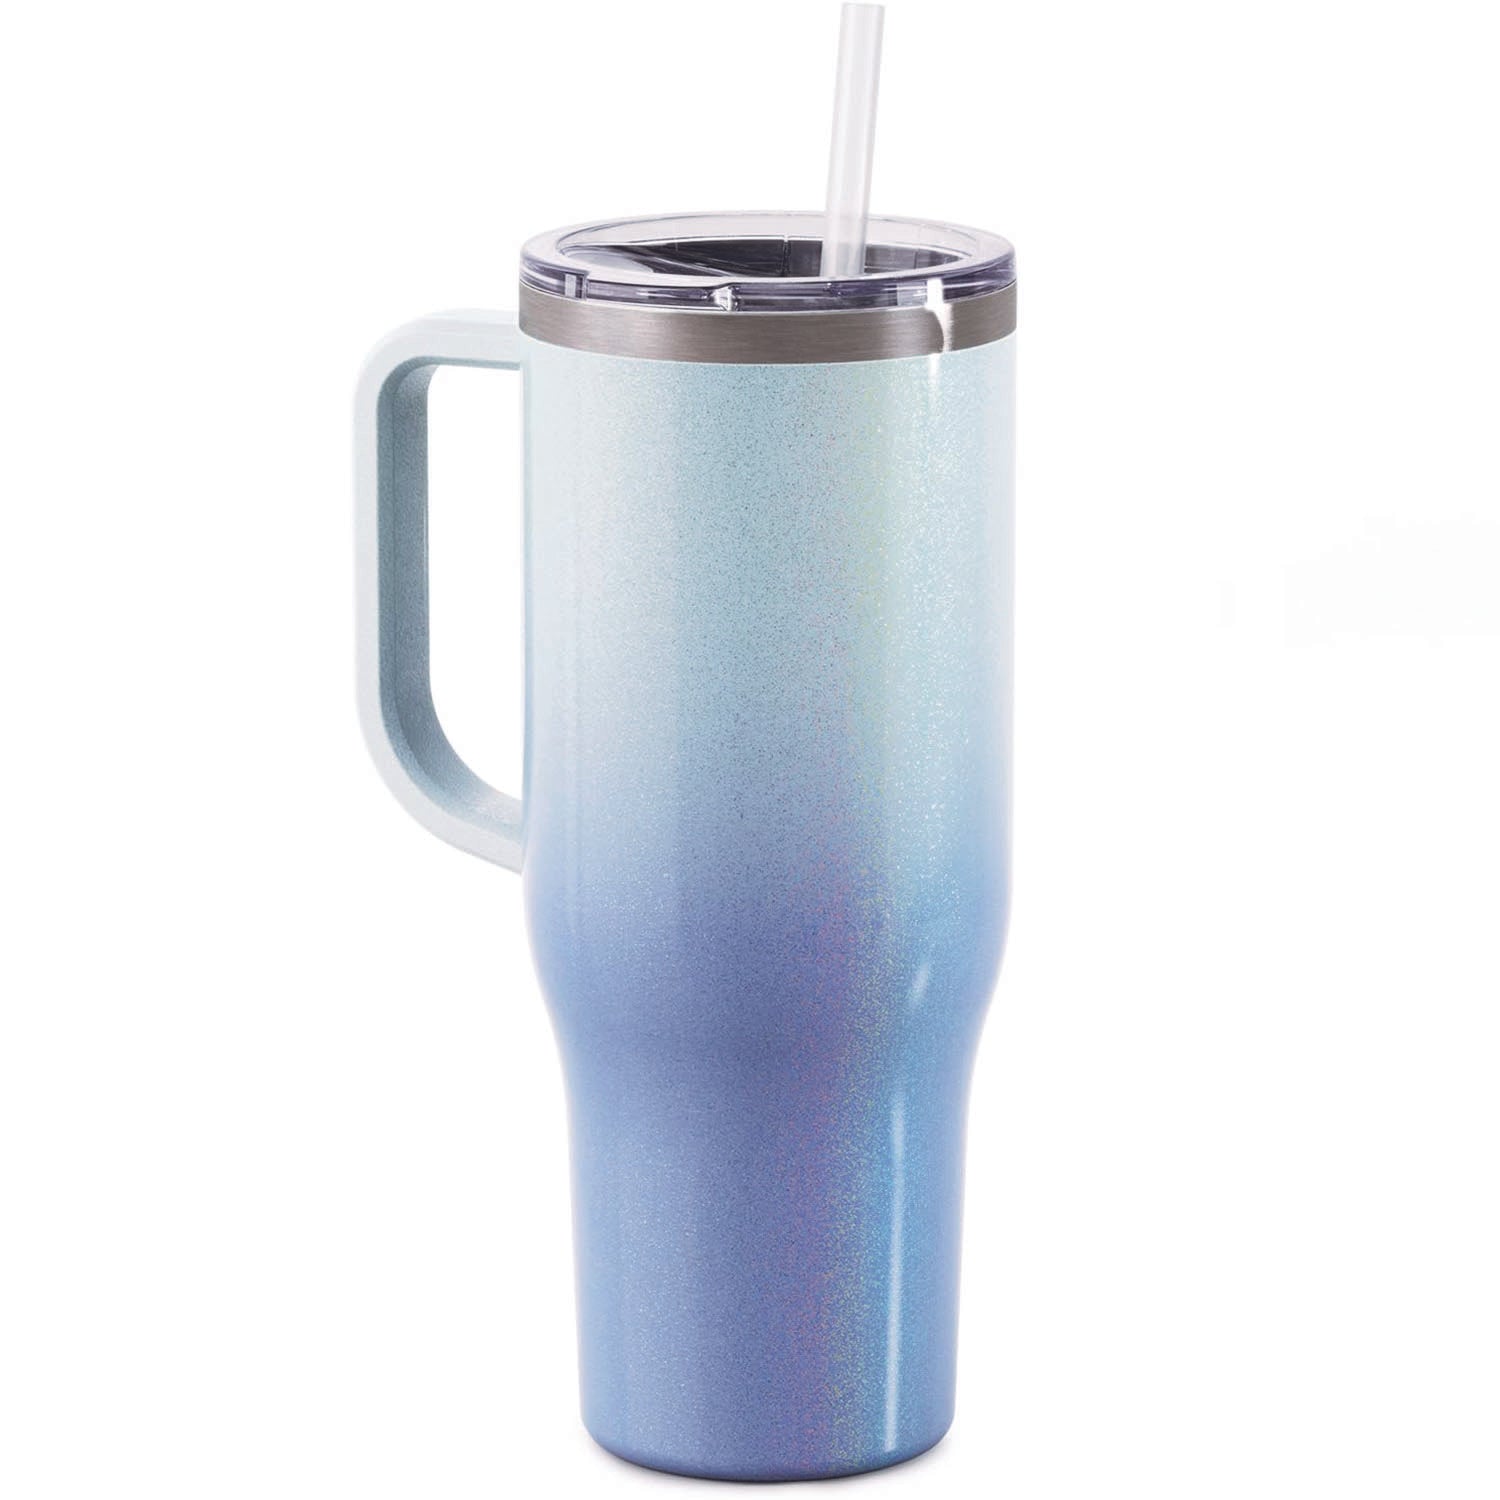 Blue Ombre Stainless Steel Handled Tumbler